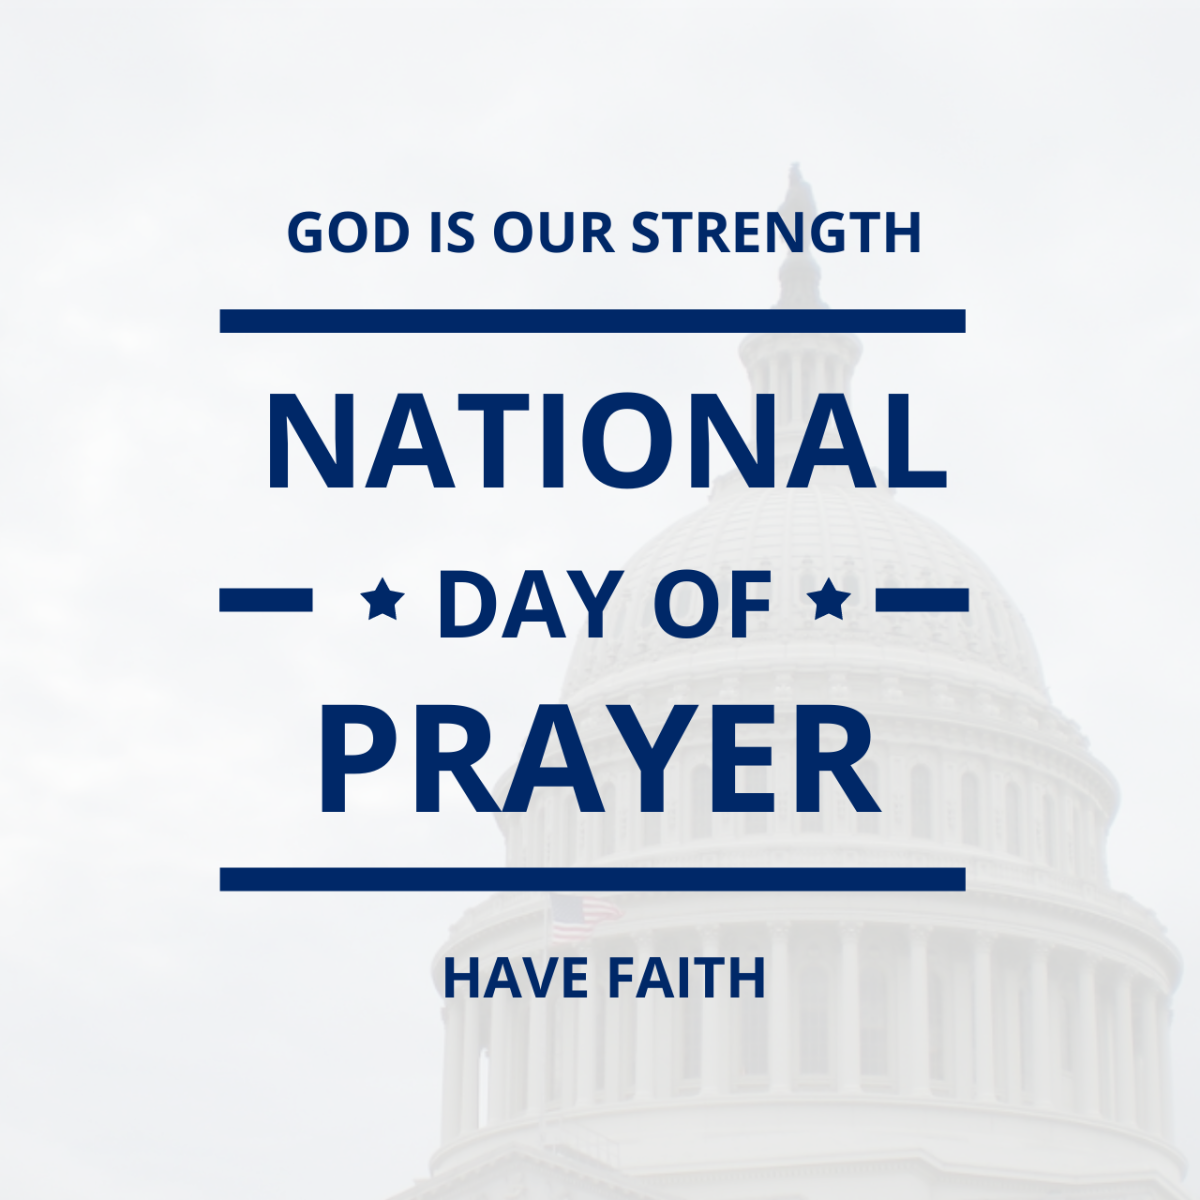 National Day of Prayer Tumblr Profile Photo Template